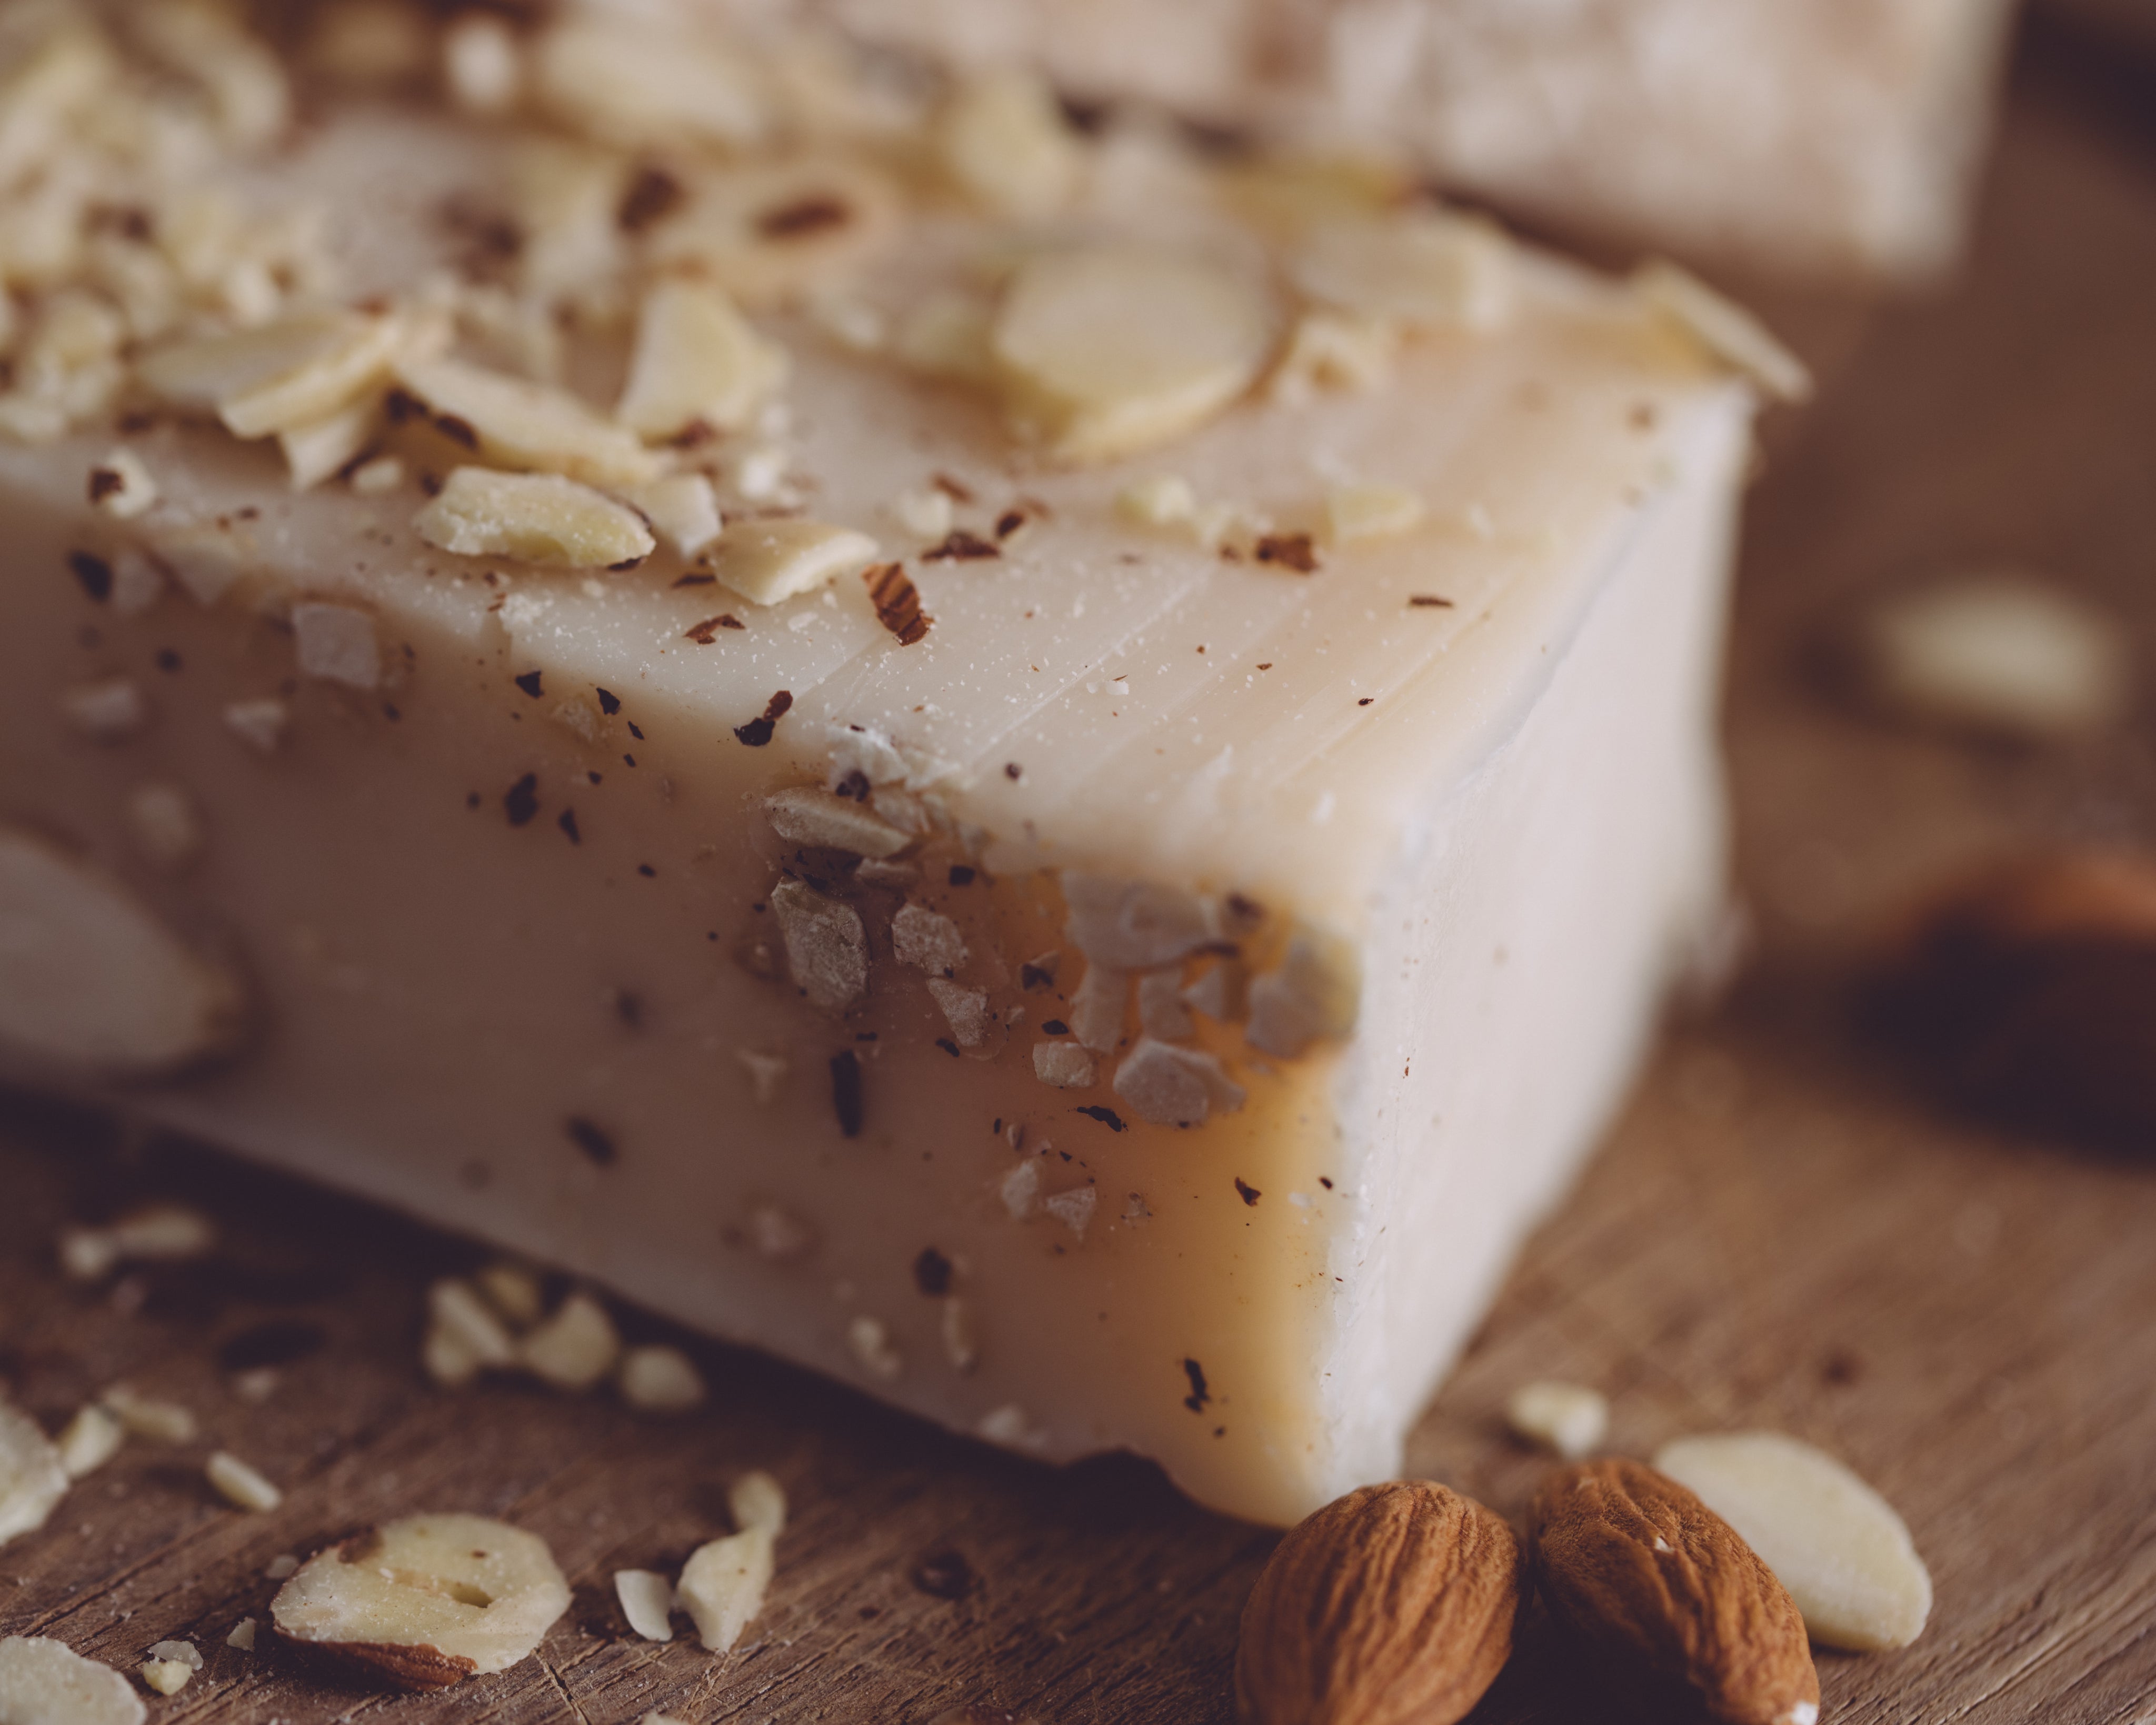 Sweet Harvest Farms Almond Cake Organic Handmade Soap. Alwys made from scratch. This handmade organic soap will last 8-10 weeks in the shower. We also offer the best  handmade organic soap wholesale as well